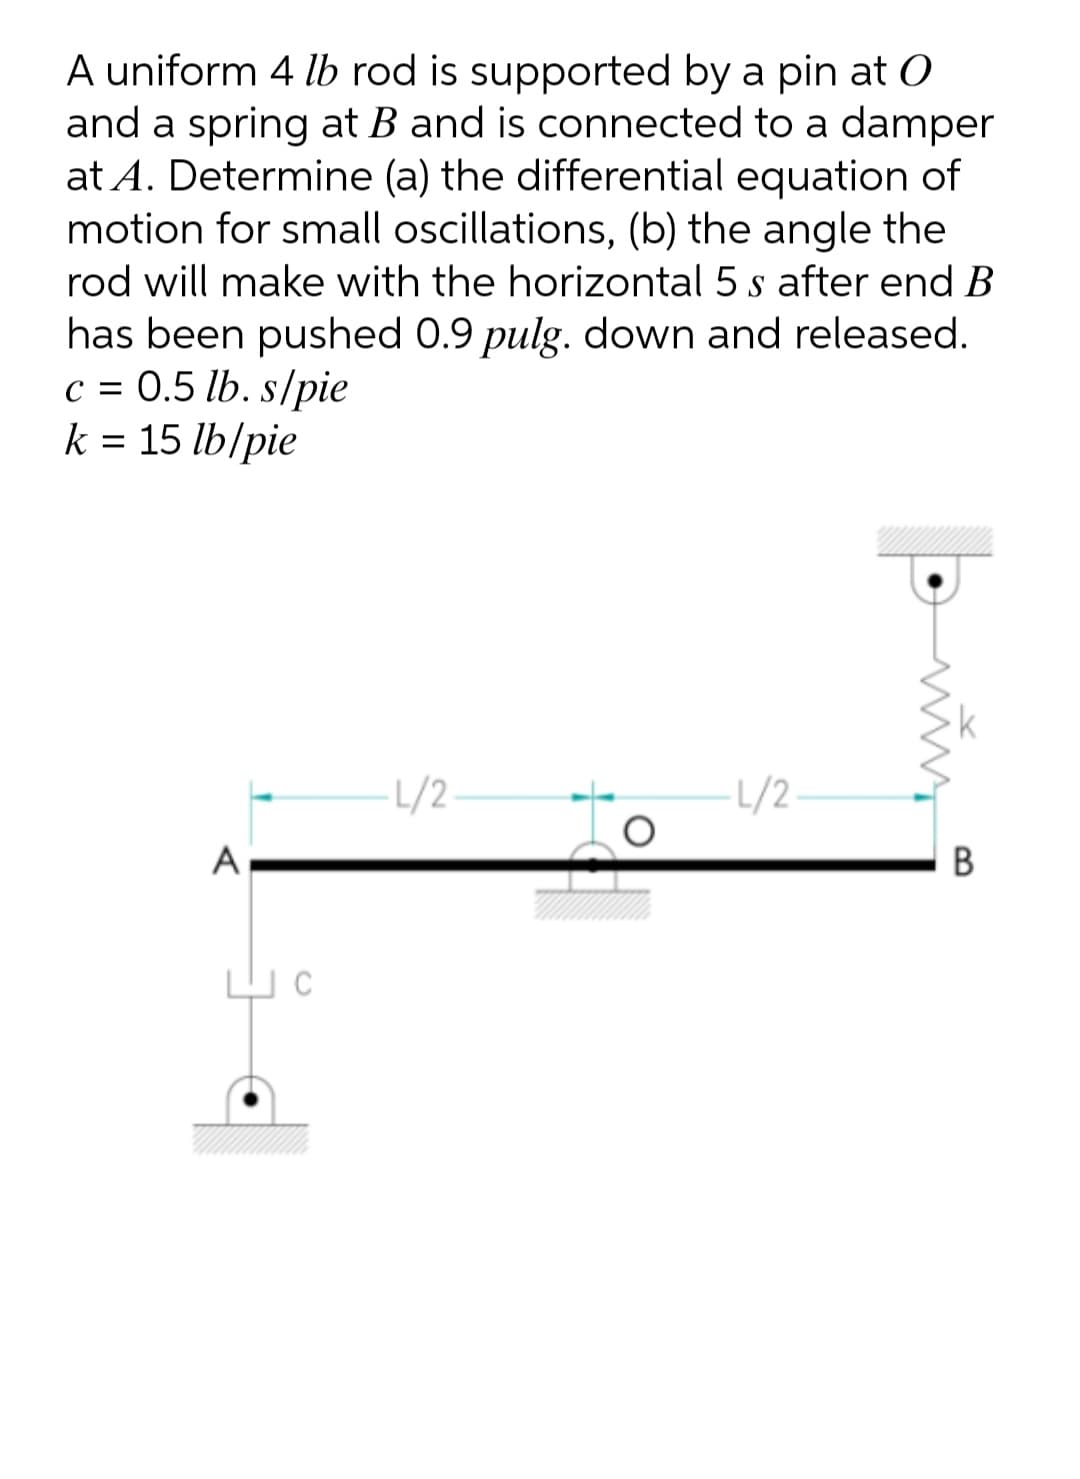 A uniform 4 lb rod is supported by a pin at 0
and a spring at B and is connected to a damper
at A. Determine (a) the differential equation of
motion for small oscillations, (b) the angle the
rod will make with the horizontal 5 s after end B
has been pushed 0.9 pulg. down and released.
c = 0.5 lb. s/pie
k = 15 lb/pie
L/2.
L/2
A
